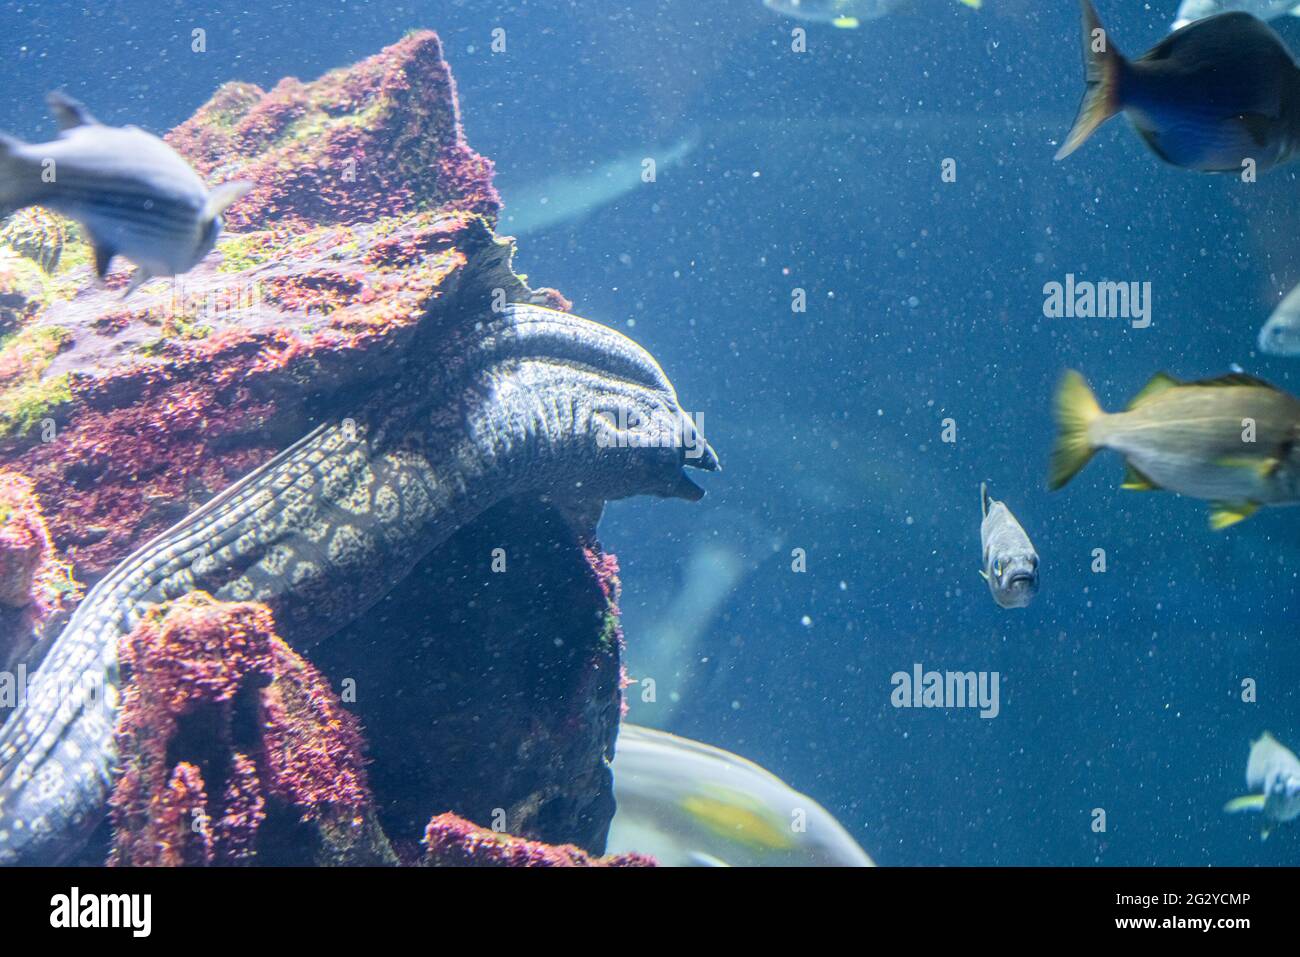 Moray Eel On Coral Reef Stock Photo